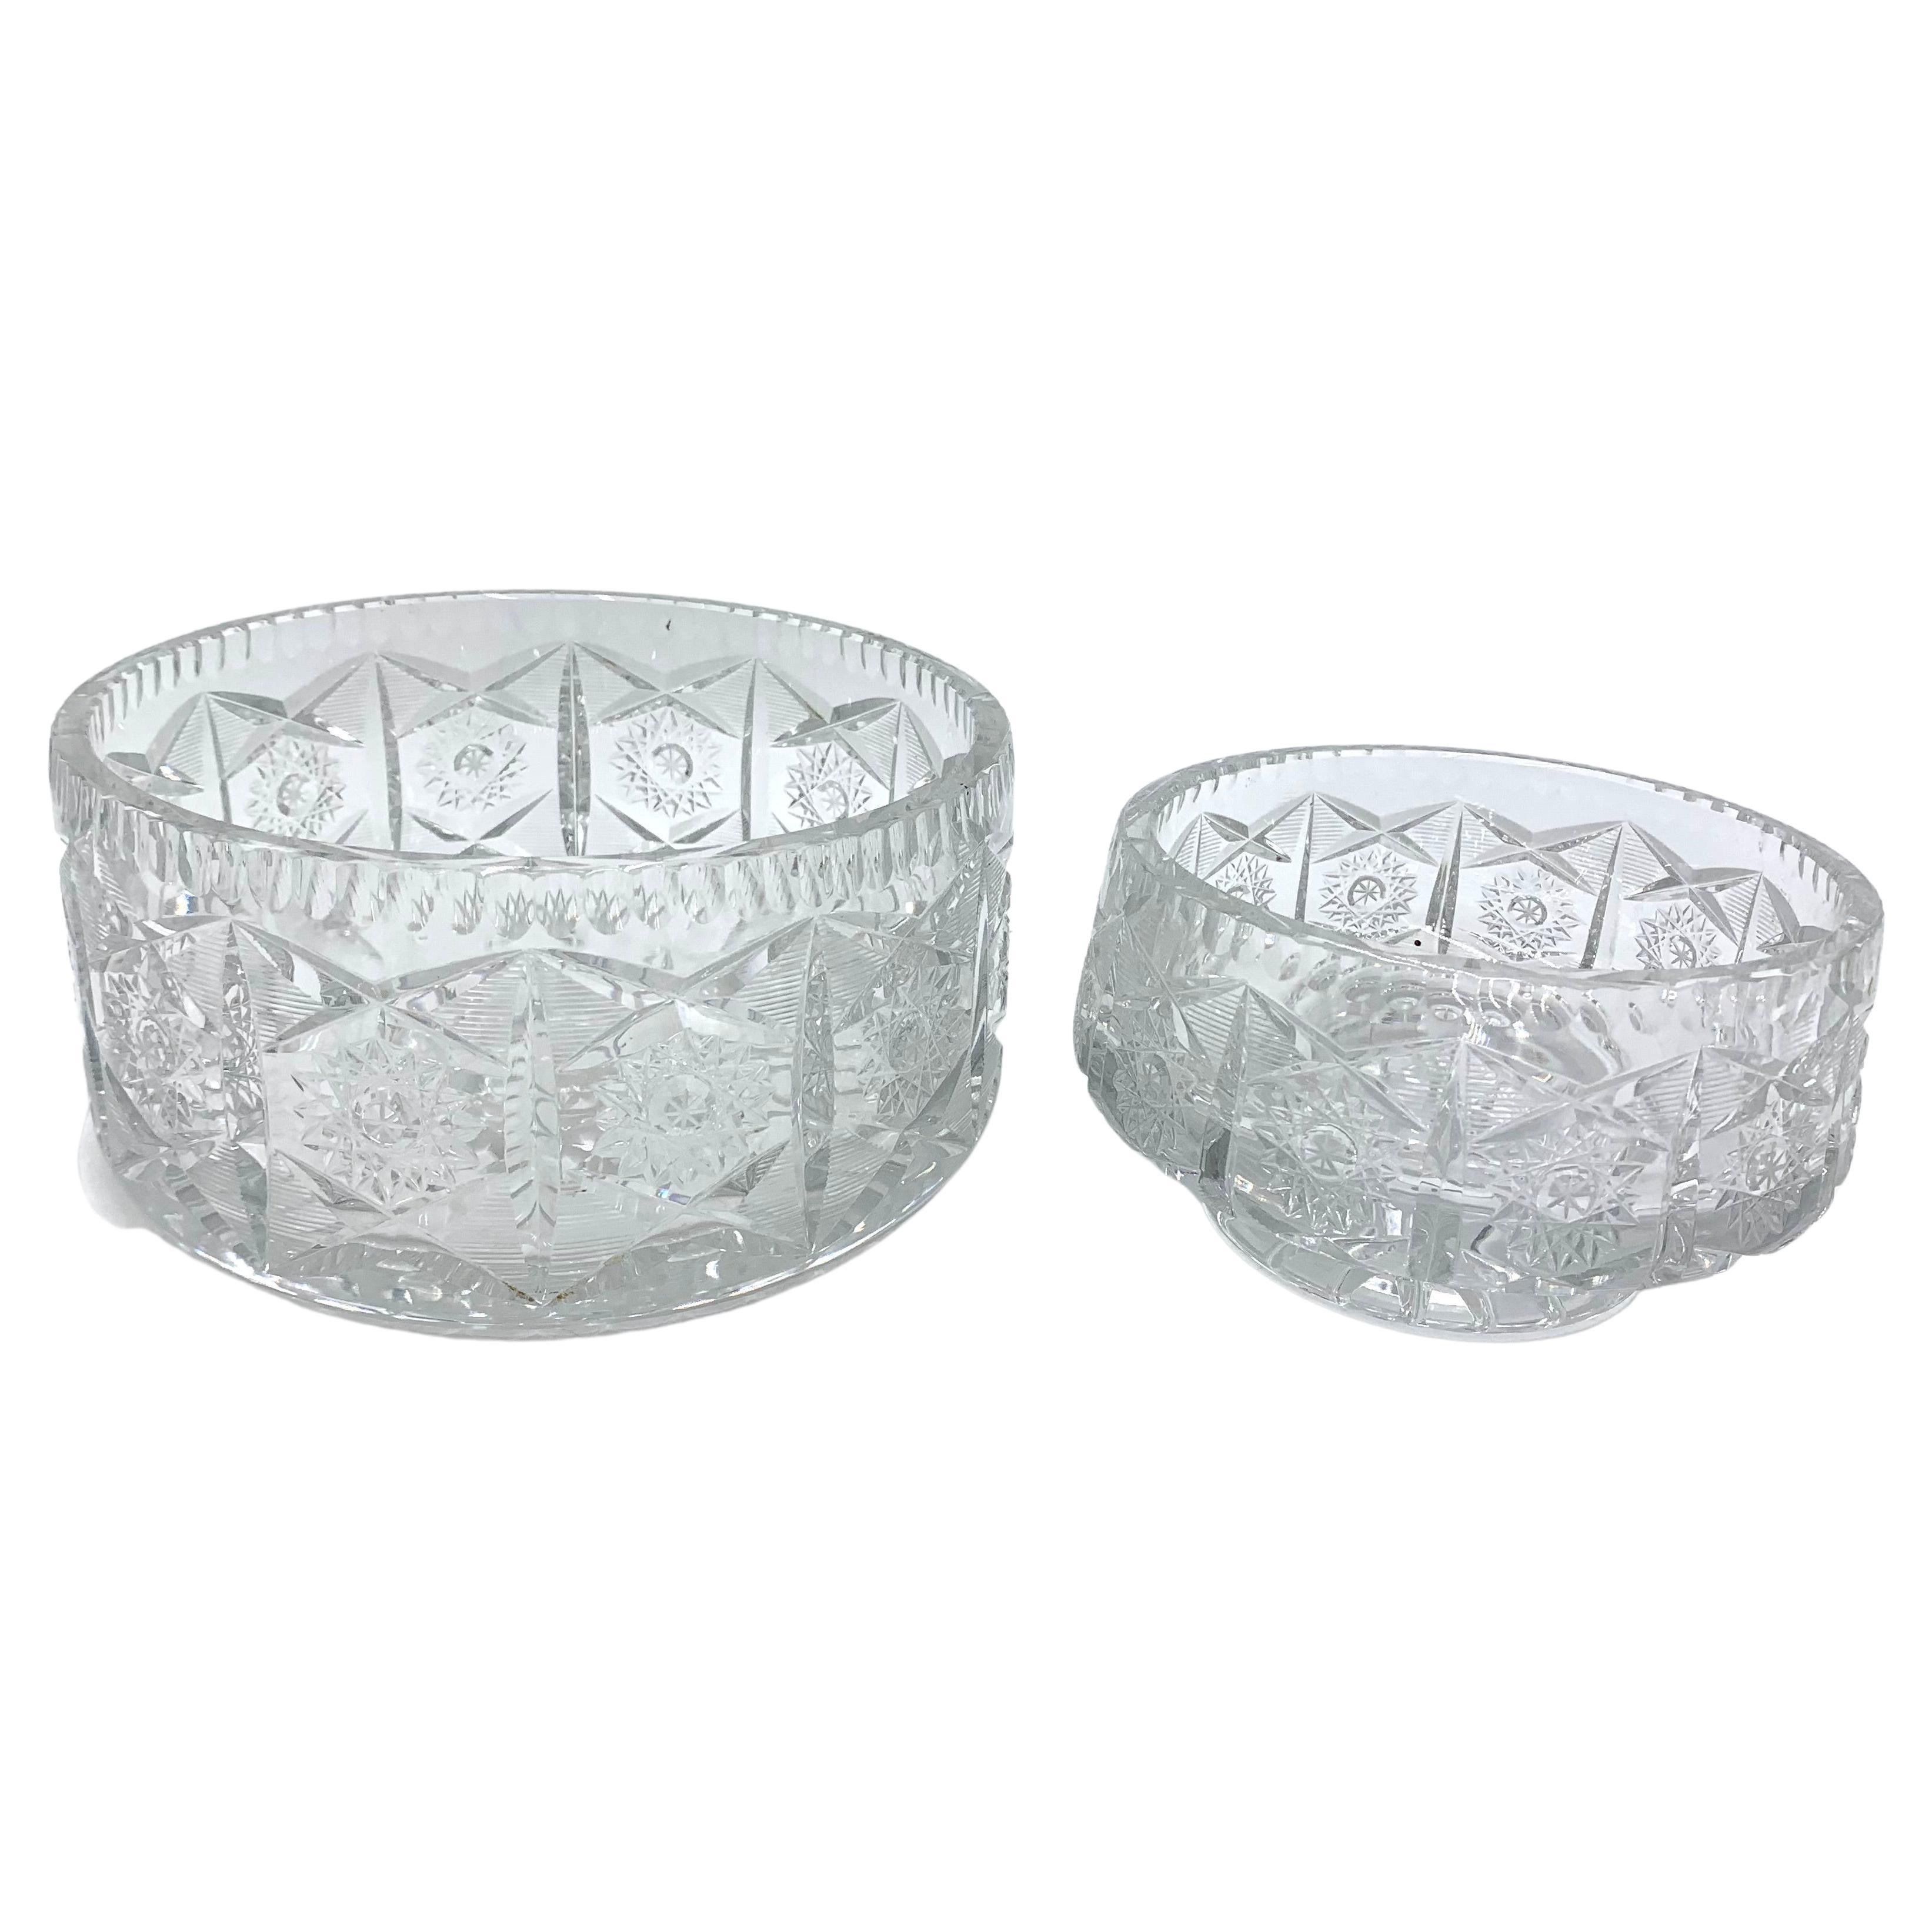 Two Crystal Decorative Bowls, Poland, 1950s